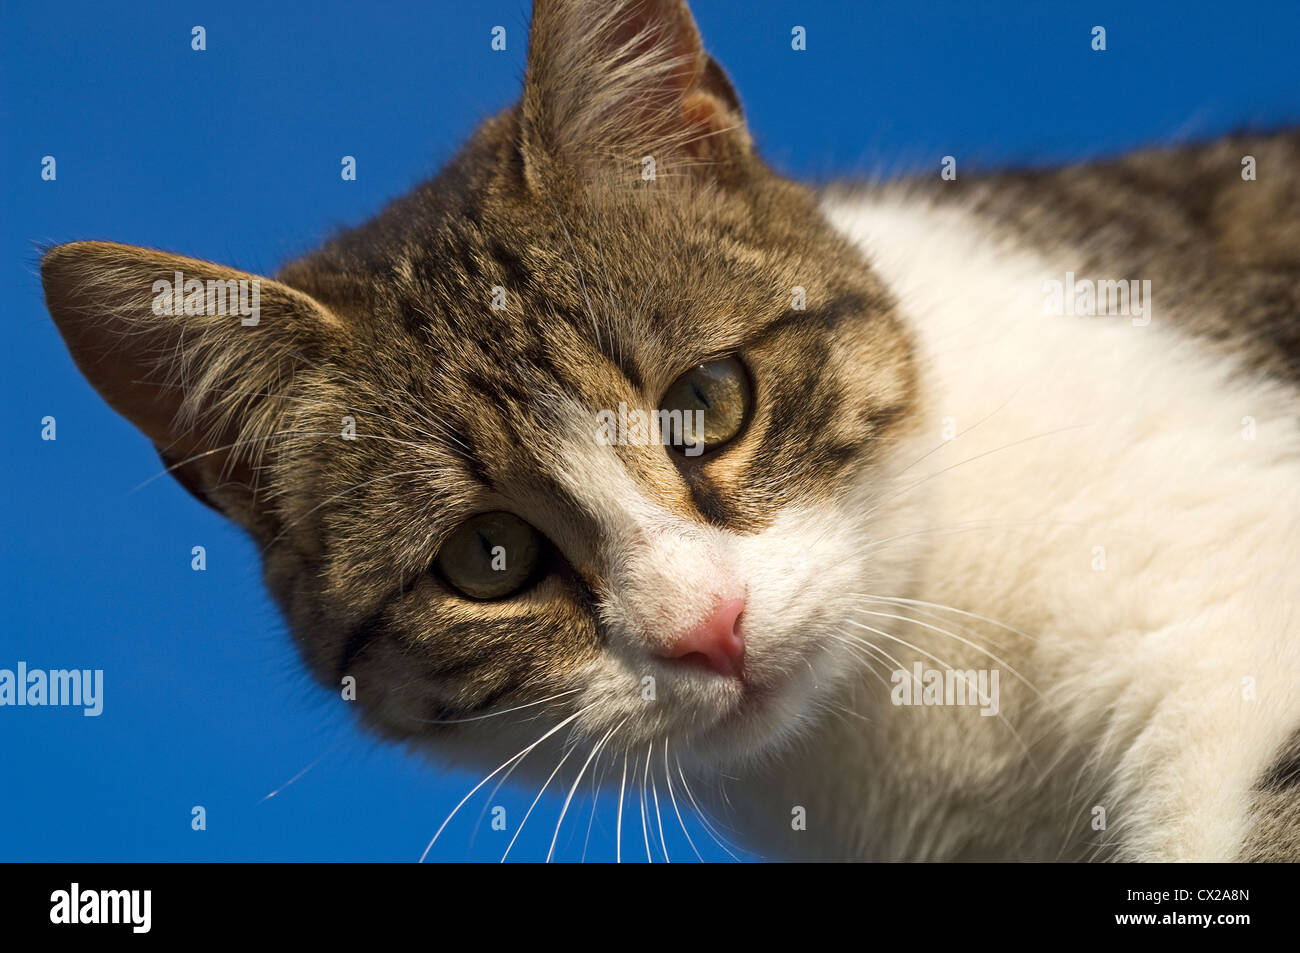 Portrait of a young cat against very blue sky looking down at camera Stock Photo